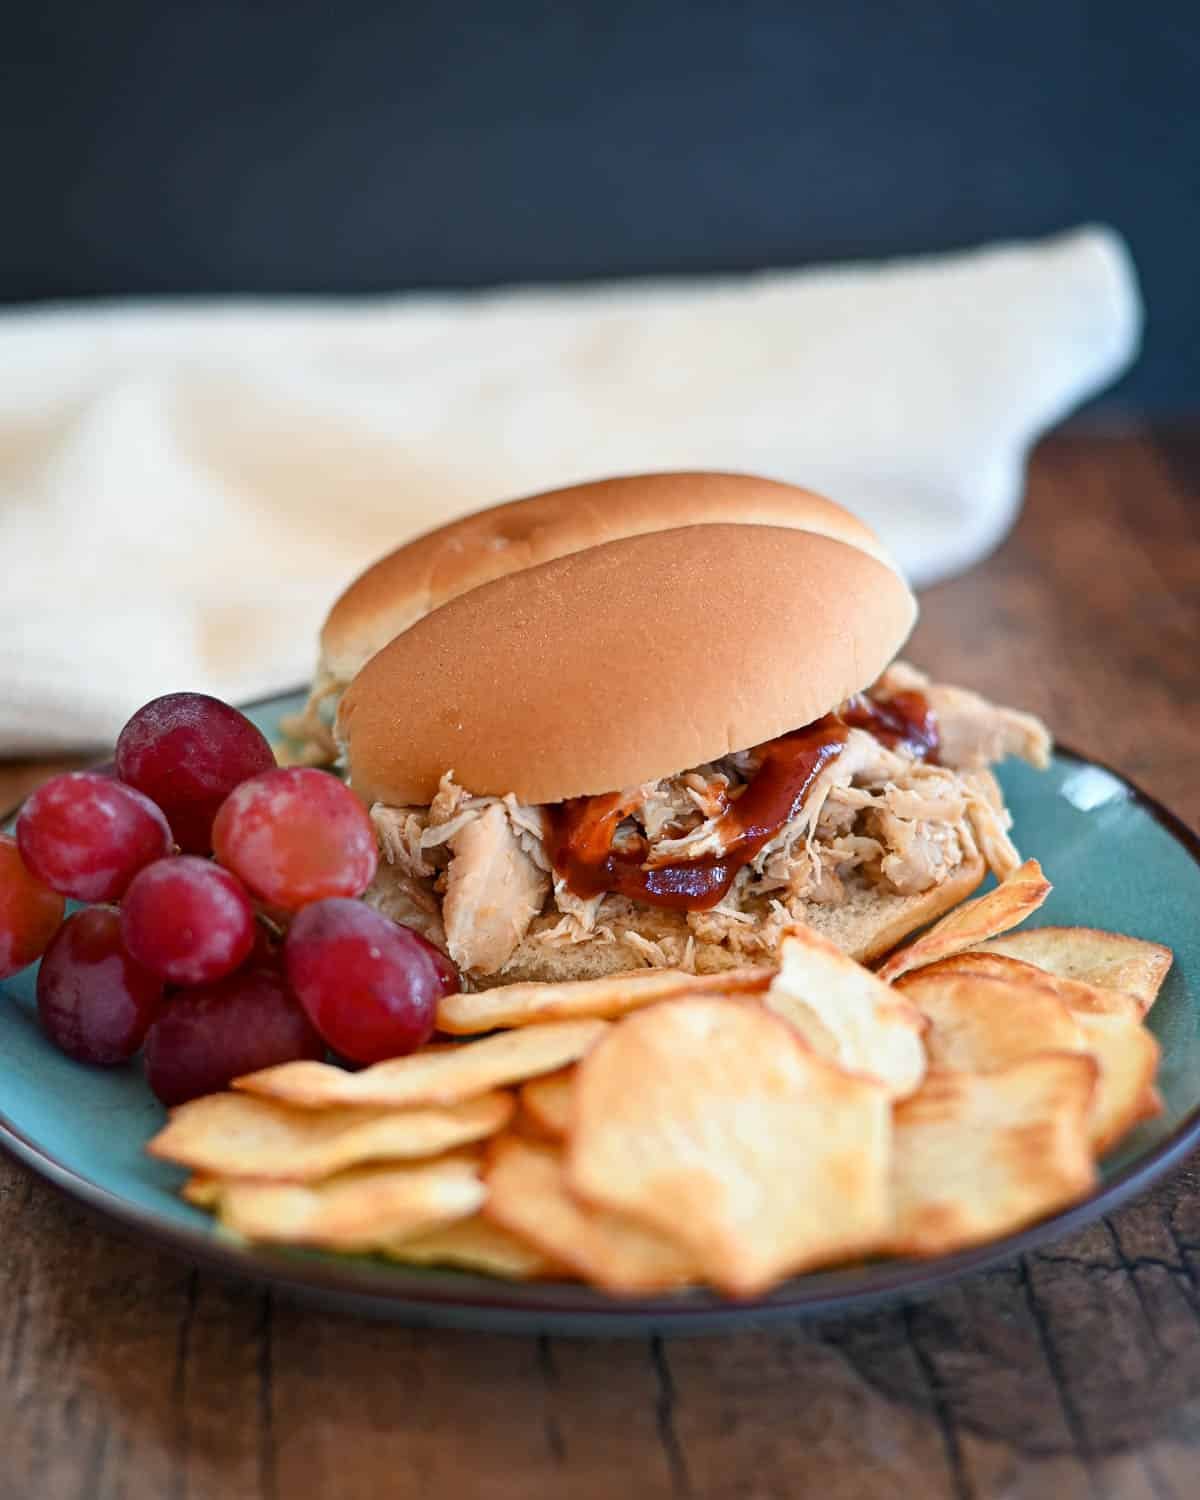 A shredded chicken sandwich next to chips and grapes on a plate.